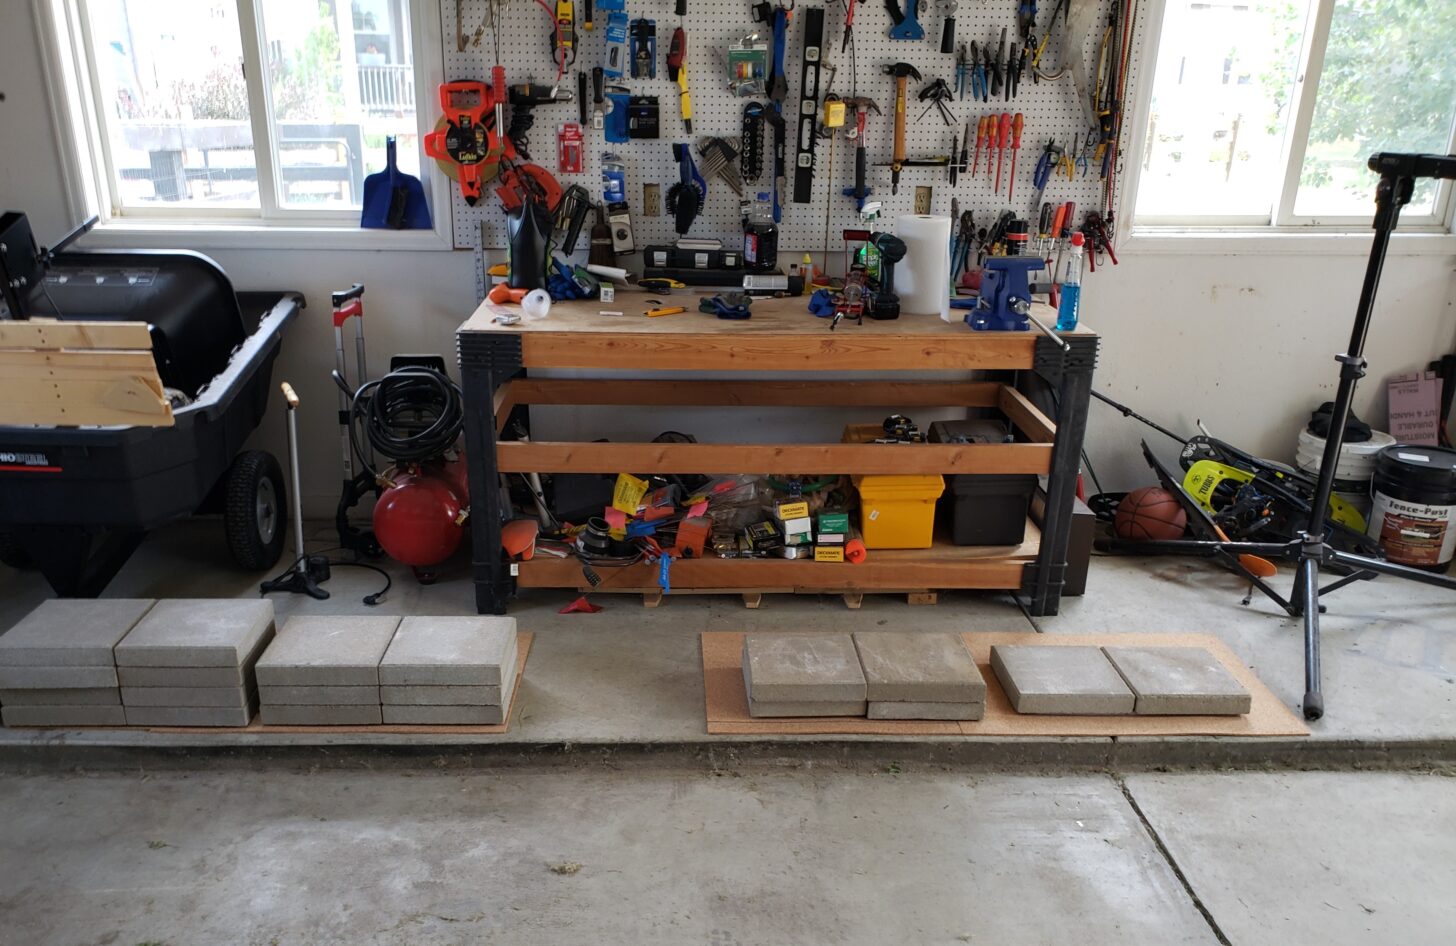 The author's garage with testing gear set up to test synthetic insulation degradation. From the bottom up: Cork pad, Rip-stop fabric, Insulation Sample, Rip-stop fabric, cork sheet, concrete pavers. As can be seen, for each sample, insulation is completely crushed under the weight of the pavers.